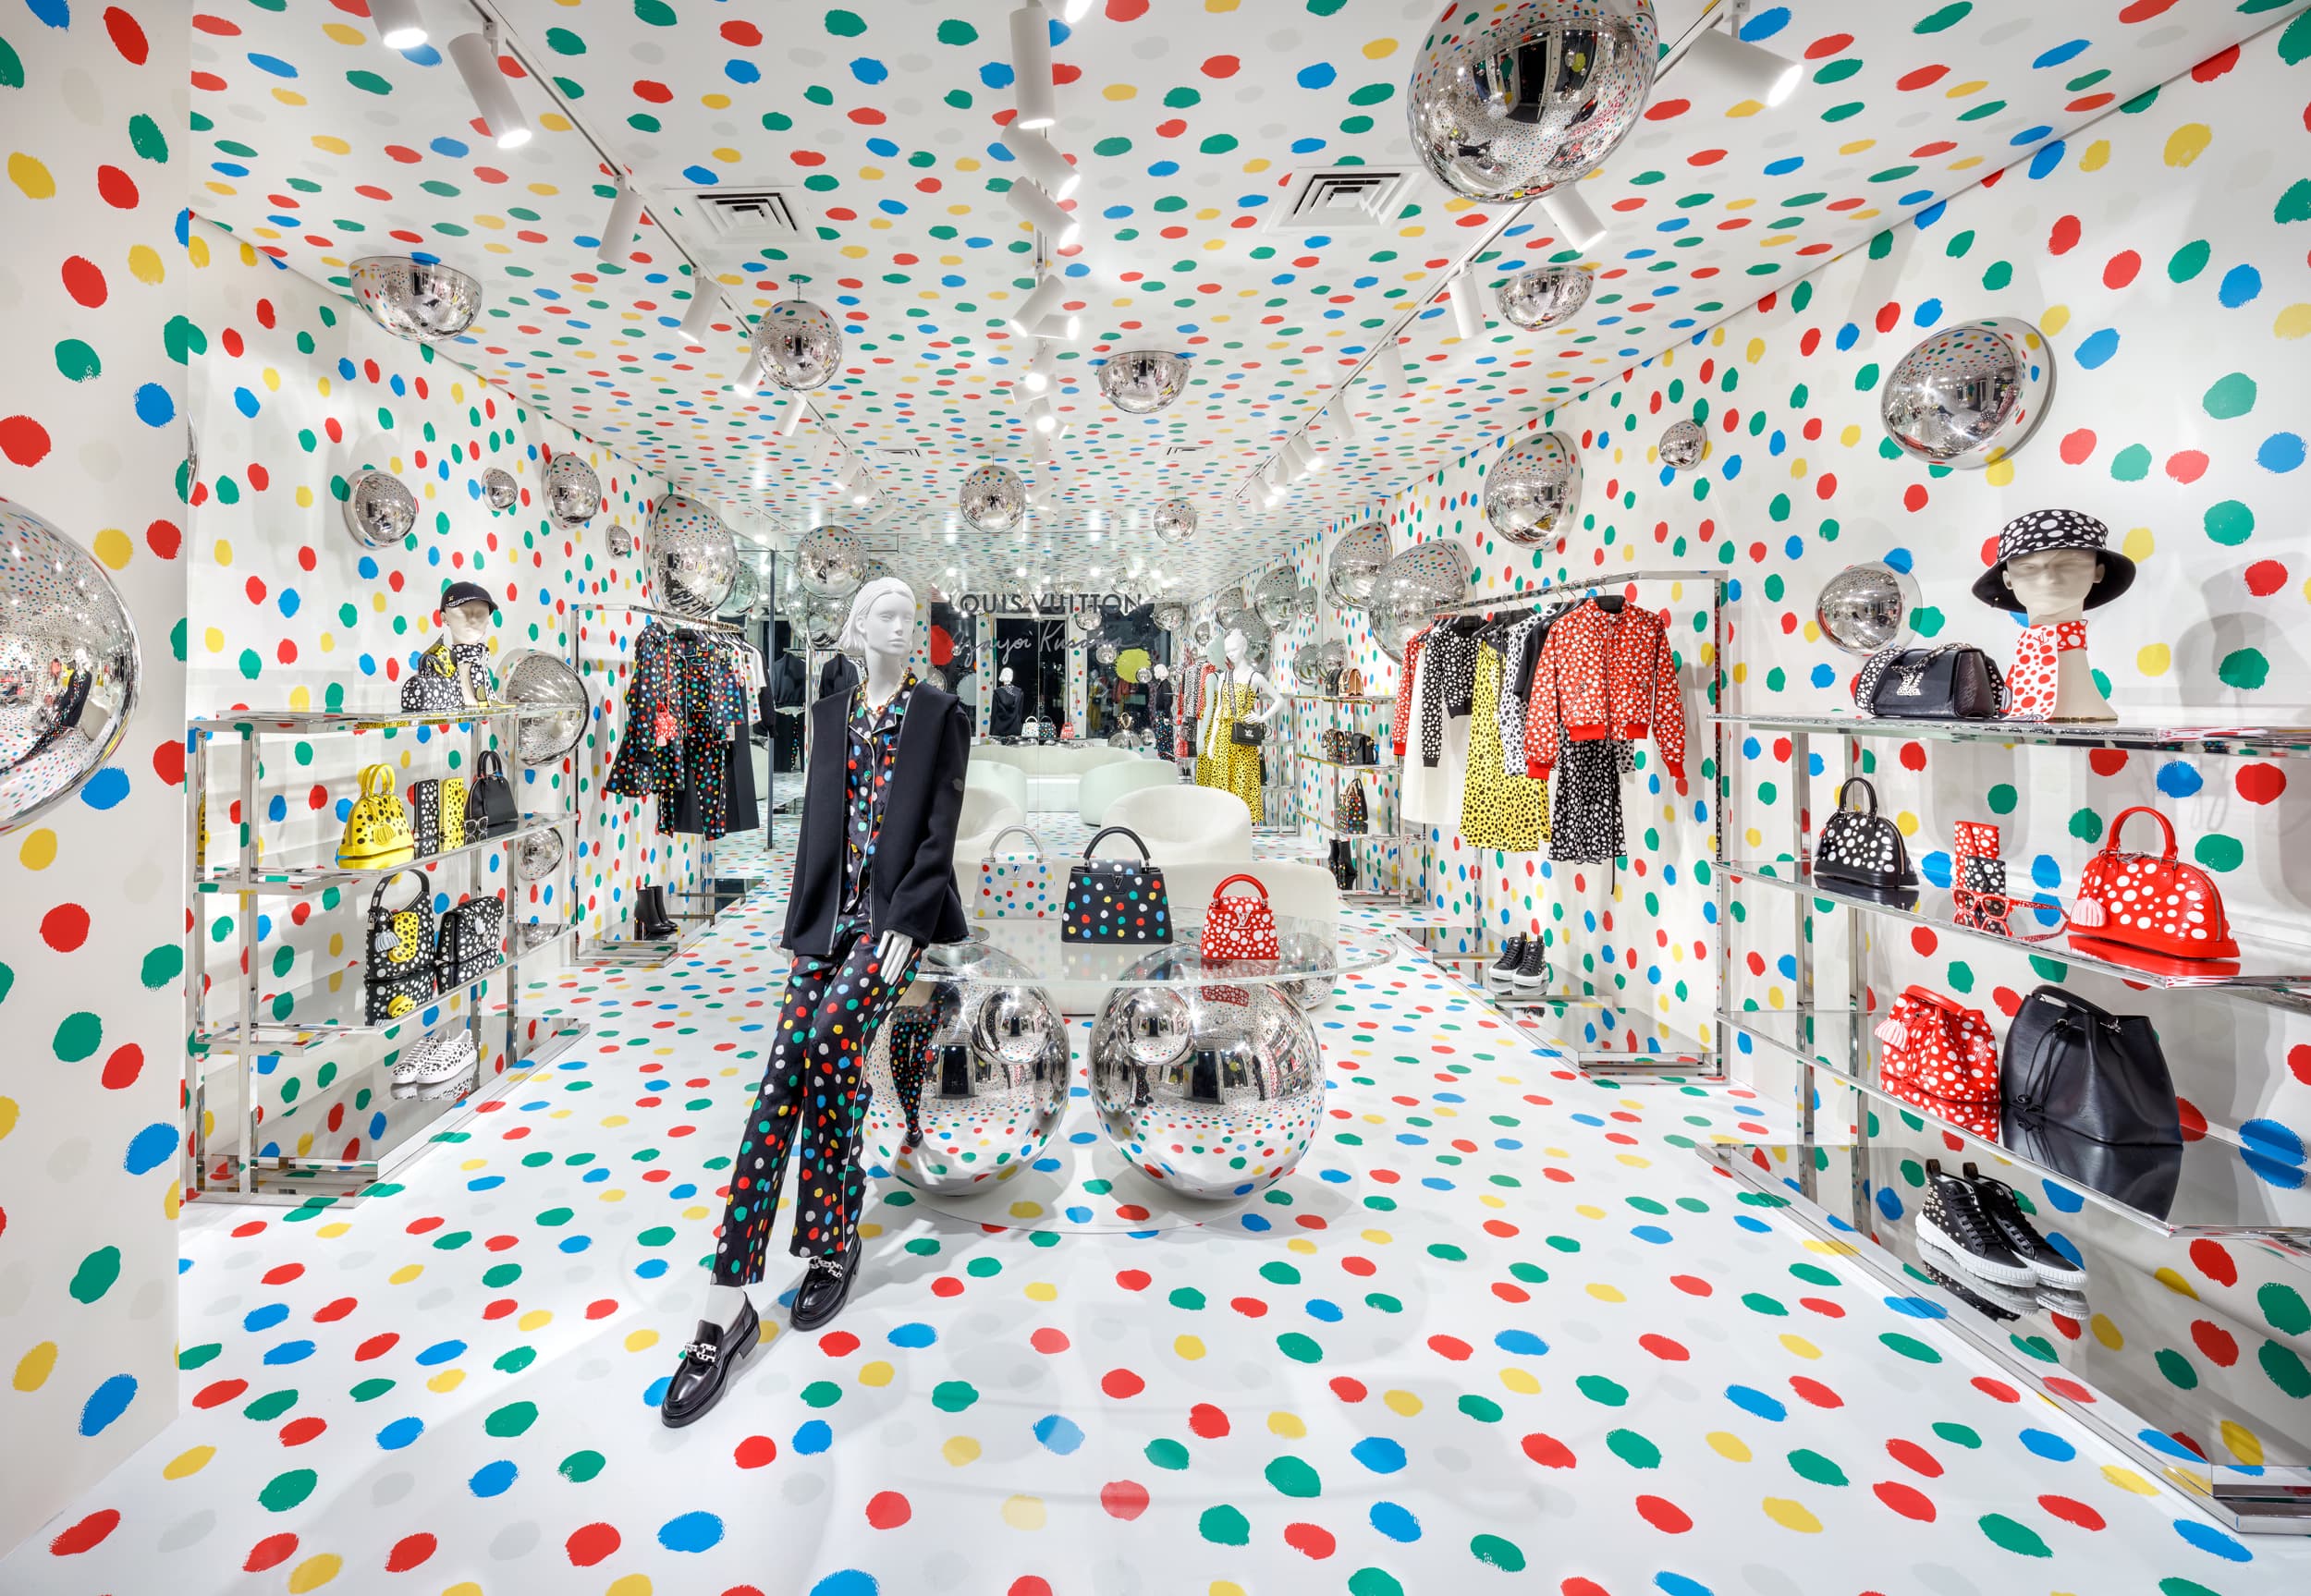 Louis Vuitton x Yayoi Kusama Collection, Presented in Dedicated